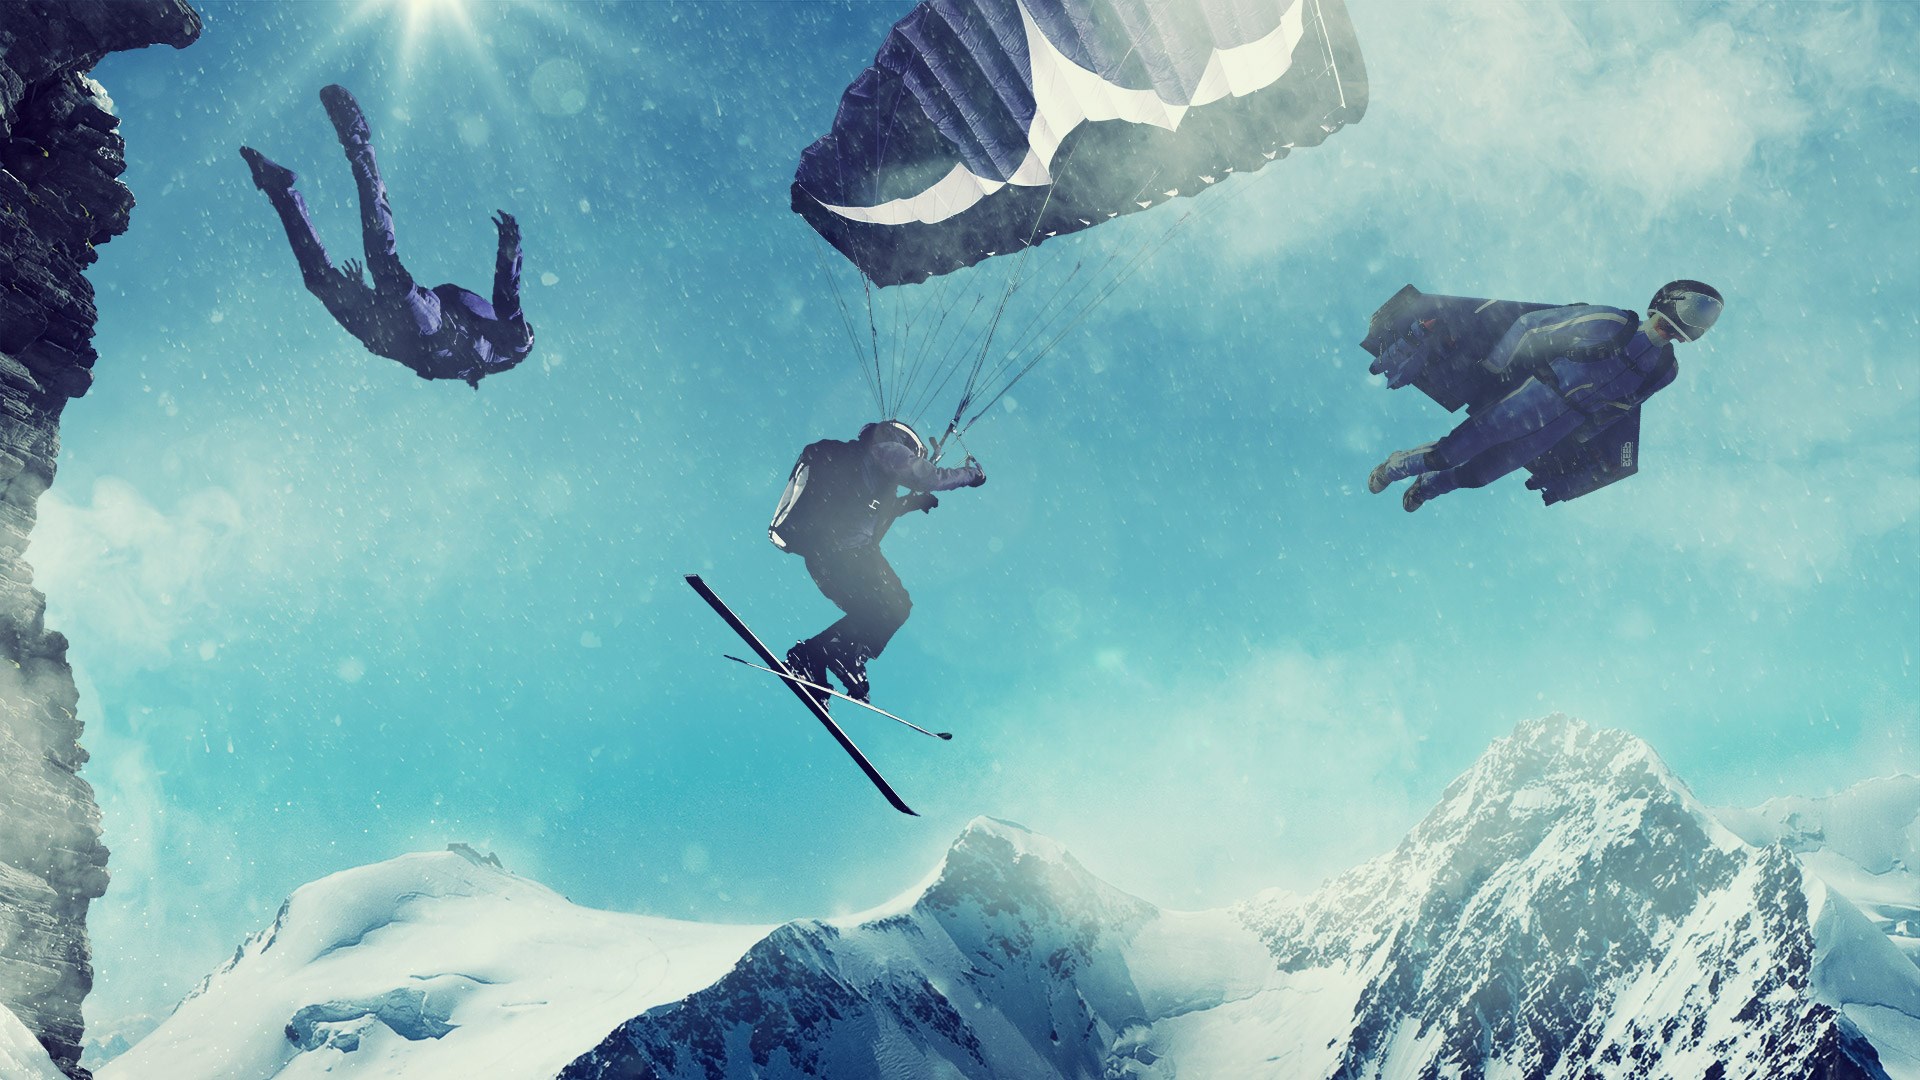 STEEP Season Pass Ubisoft Connect for PC - Buy now